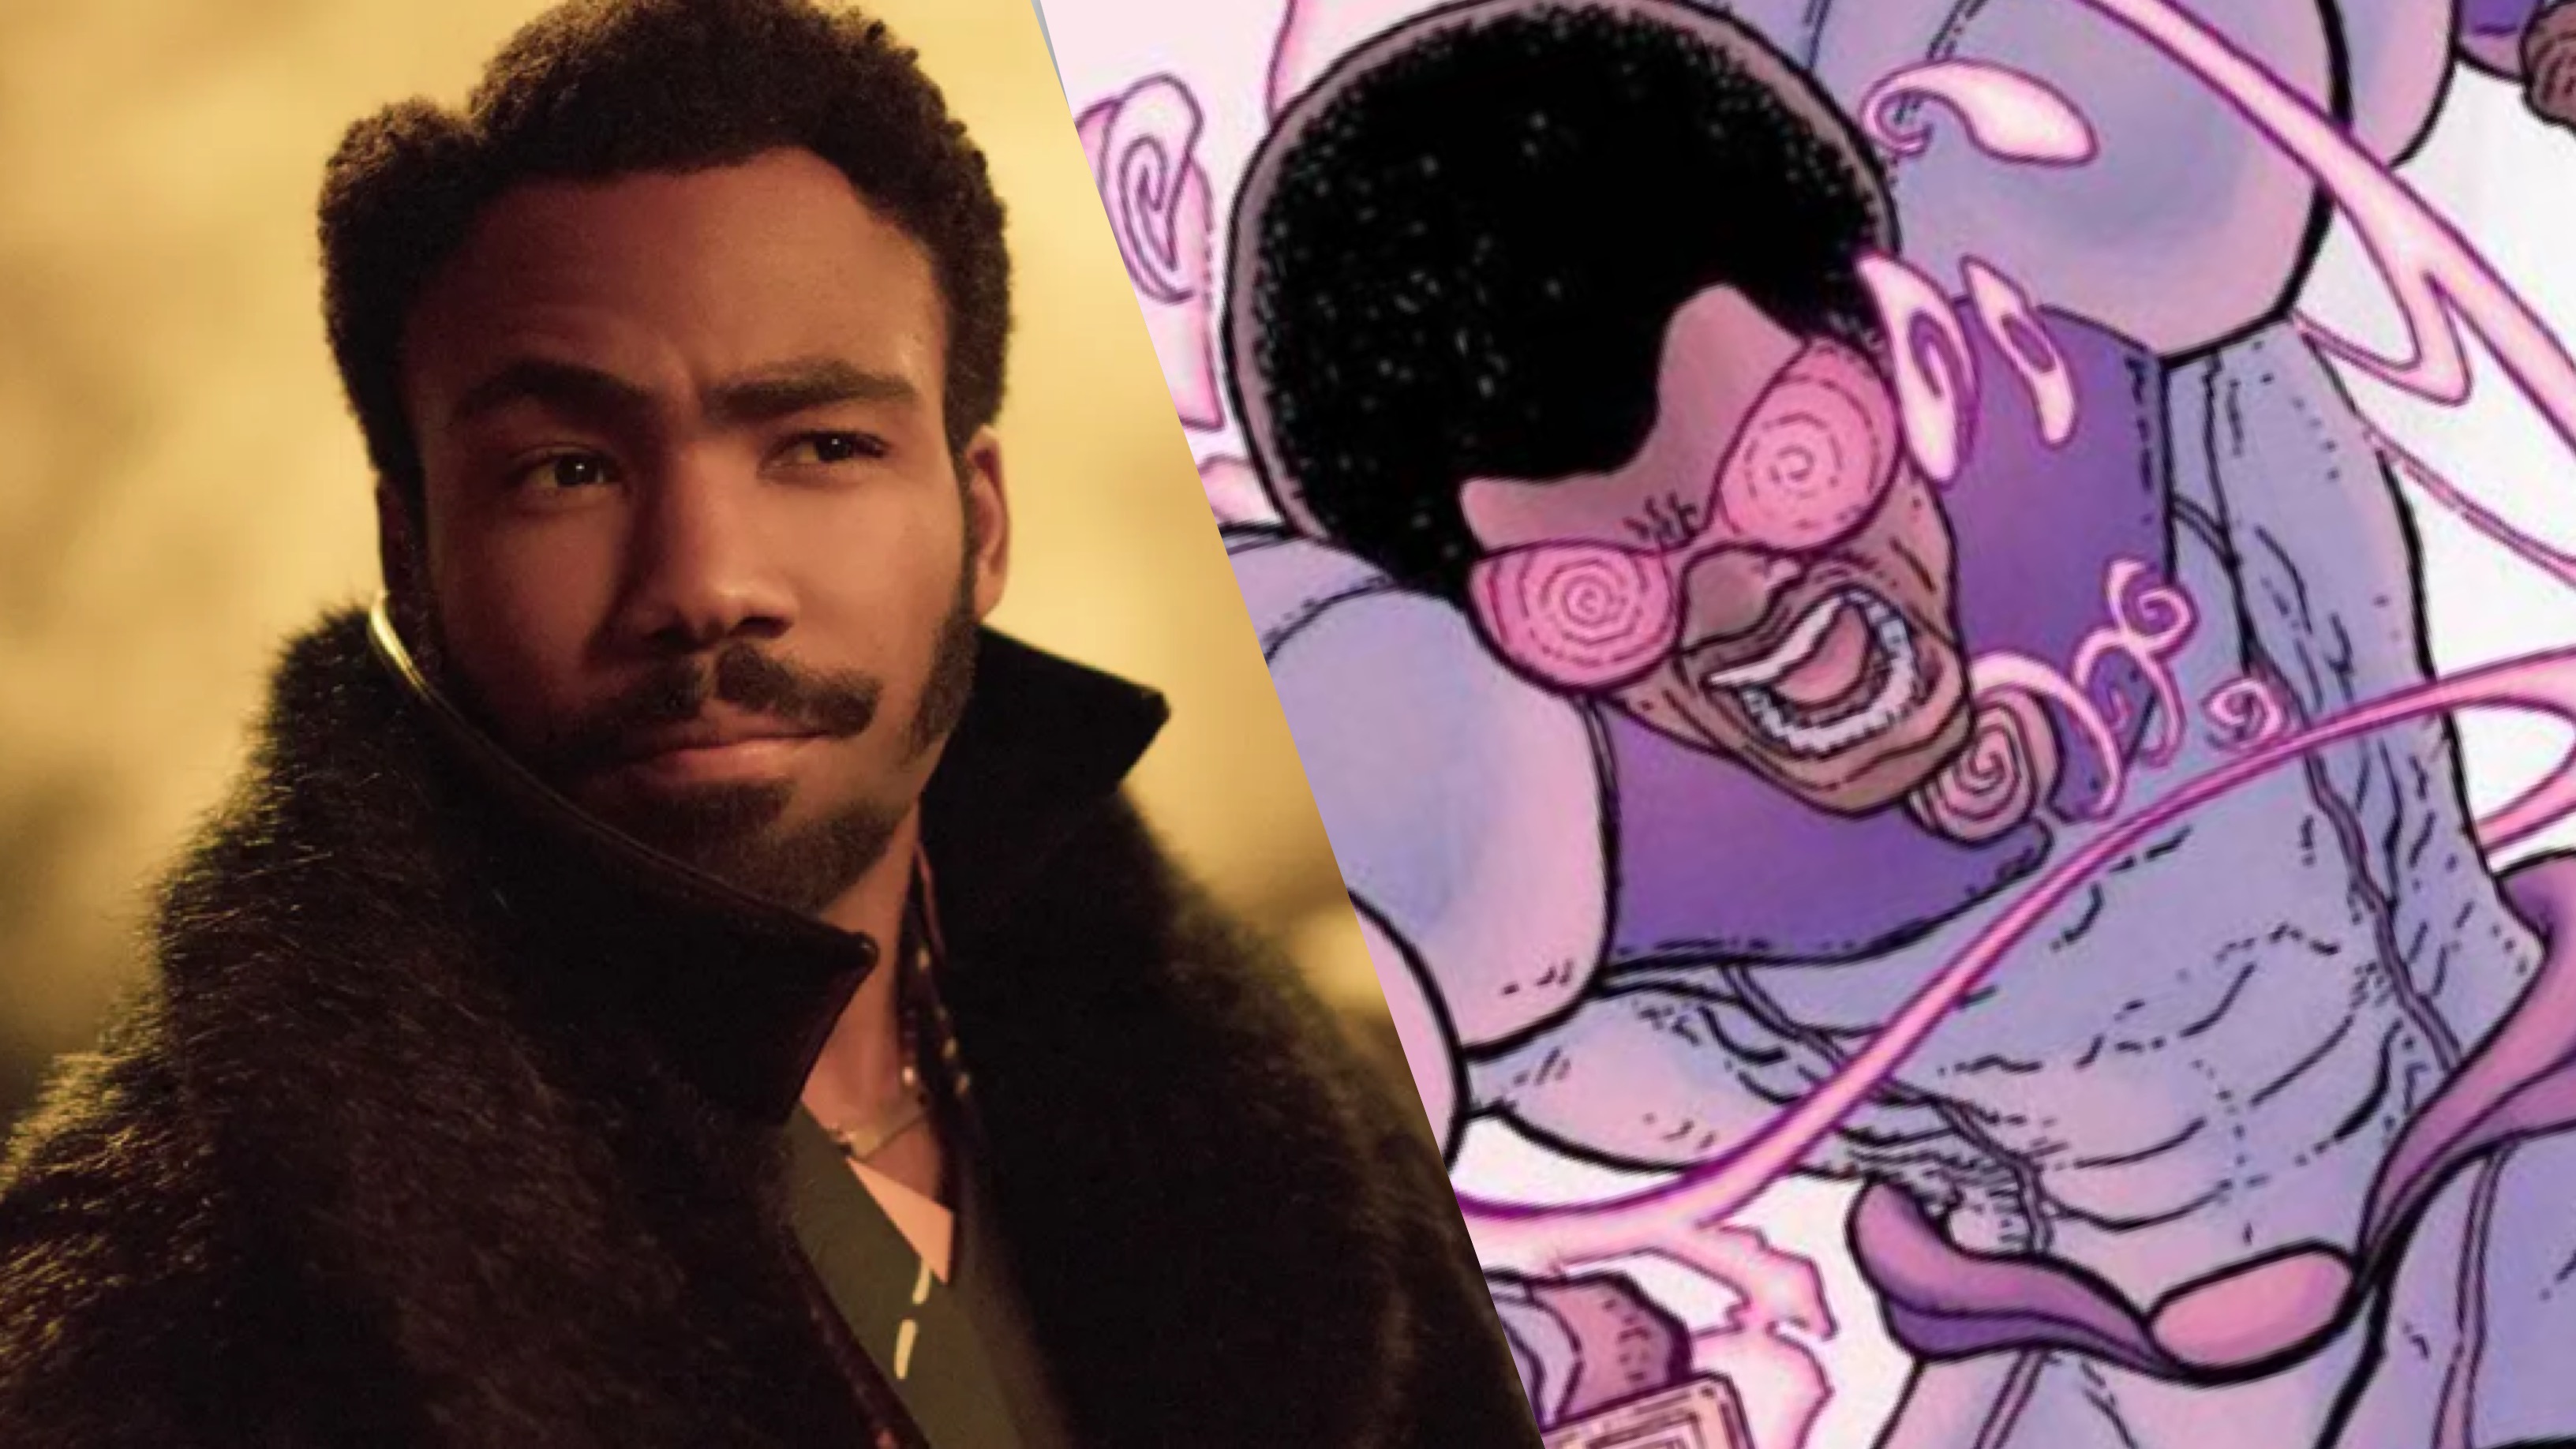 Donald Glover to Produce and Star in Spider-Man Spinoff Based on Hypno-Hustler